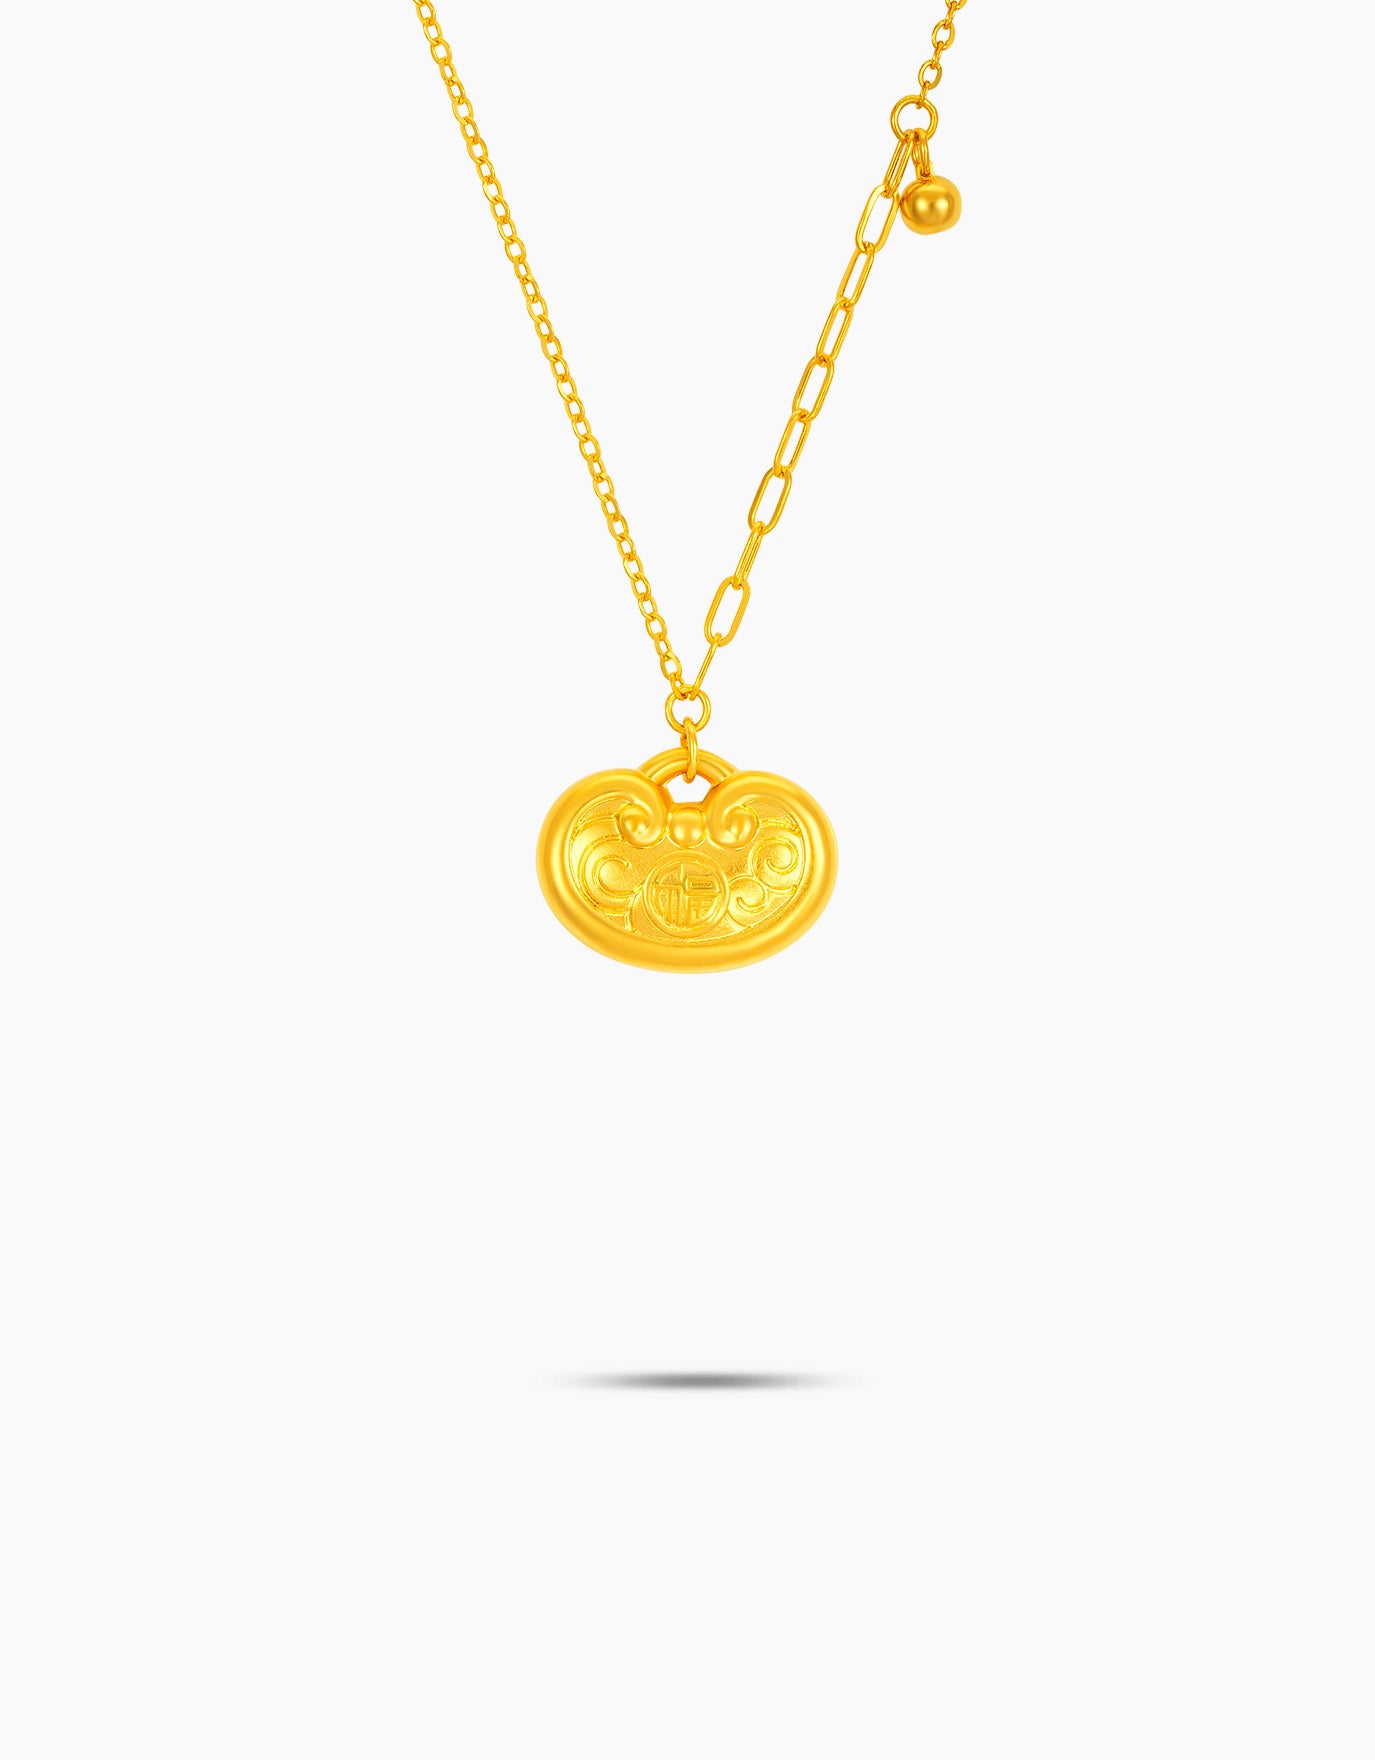 LVC 9IN Locket 999 Gold Necklace